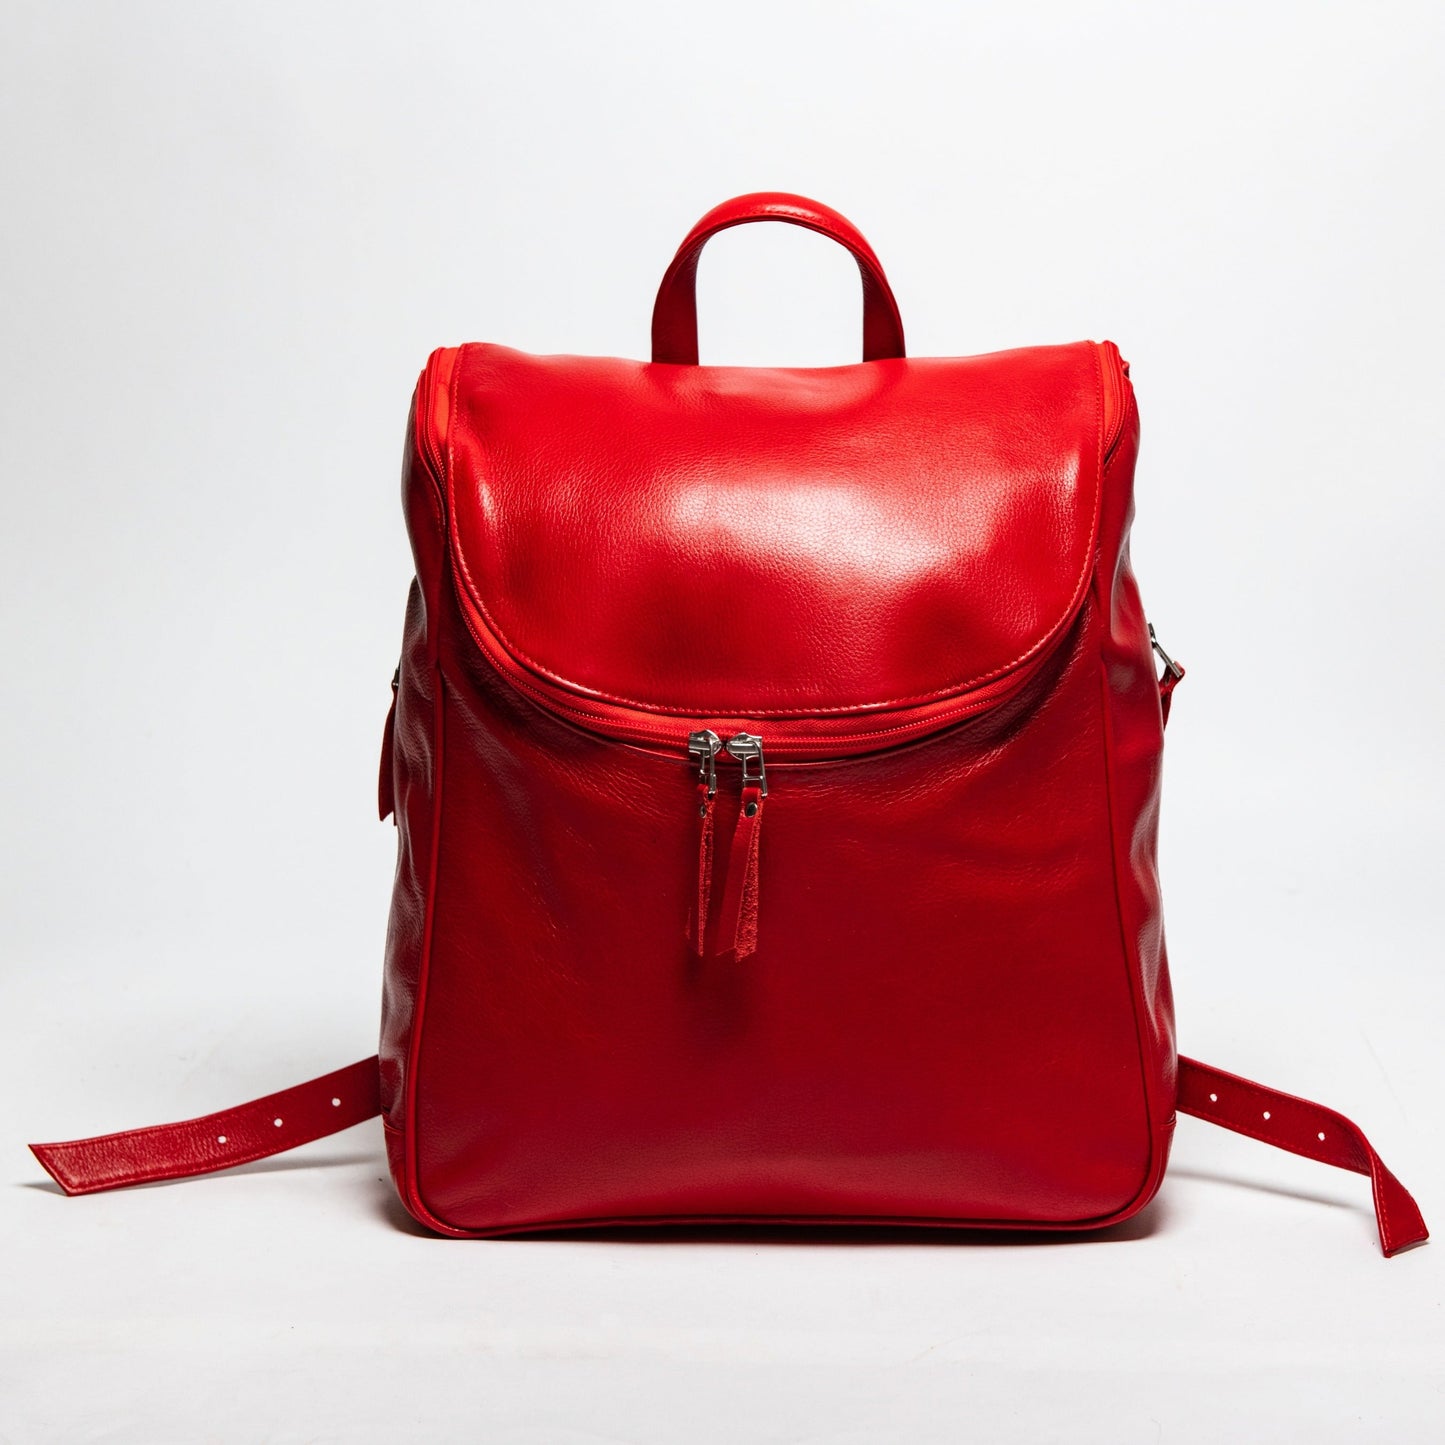 Student Leather Backpack - Red